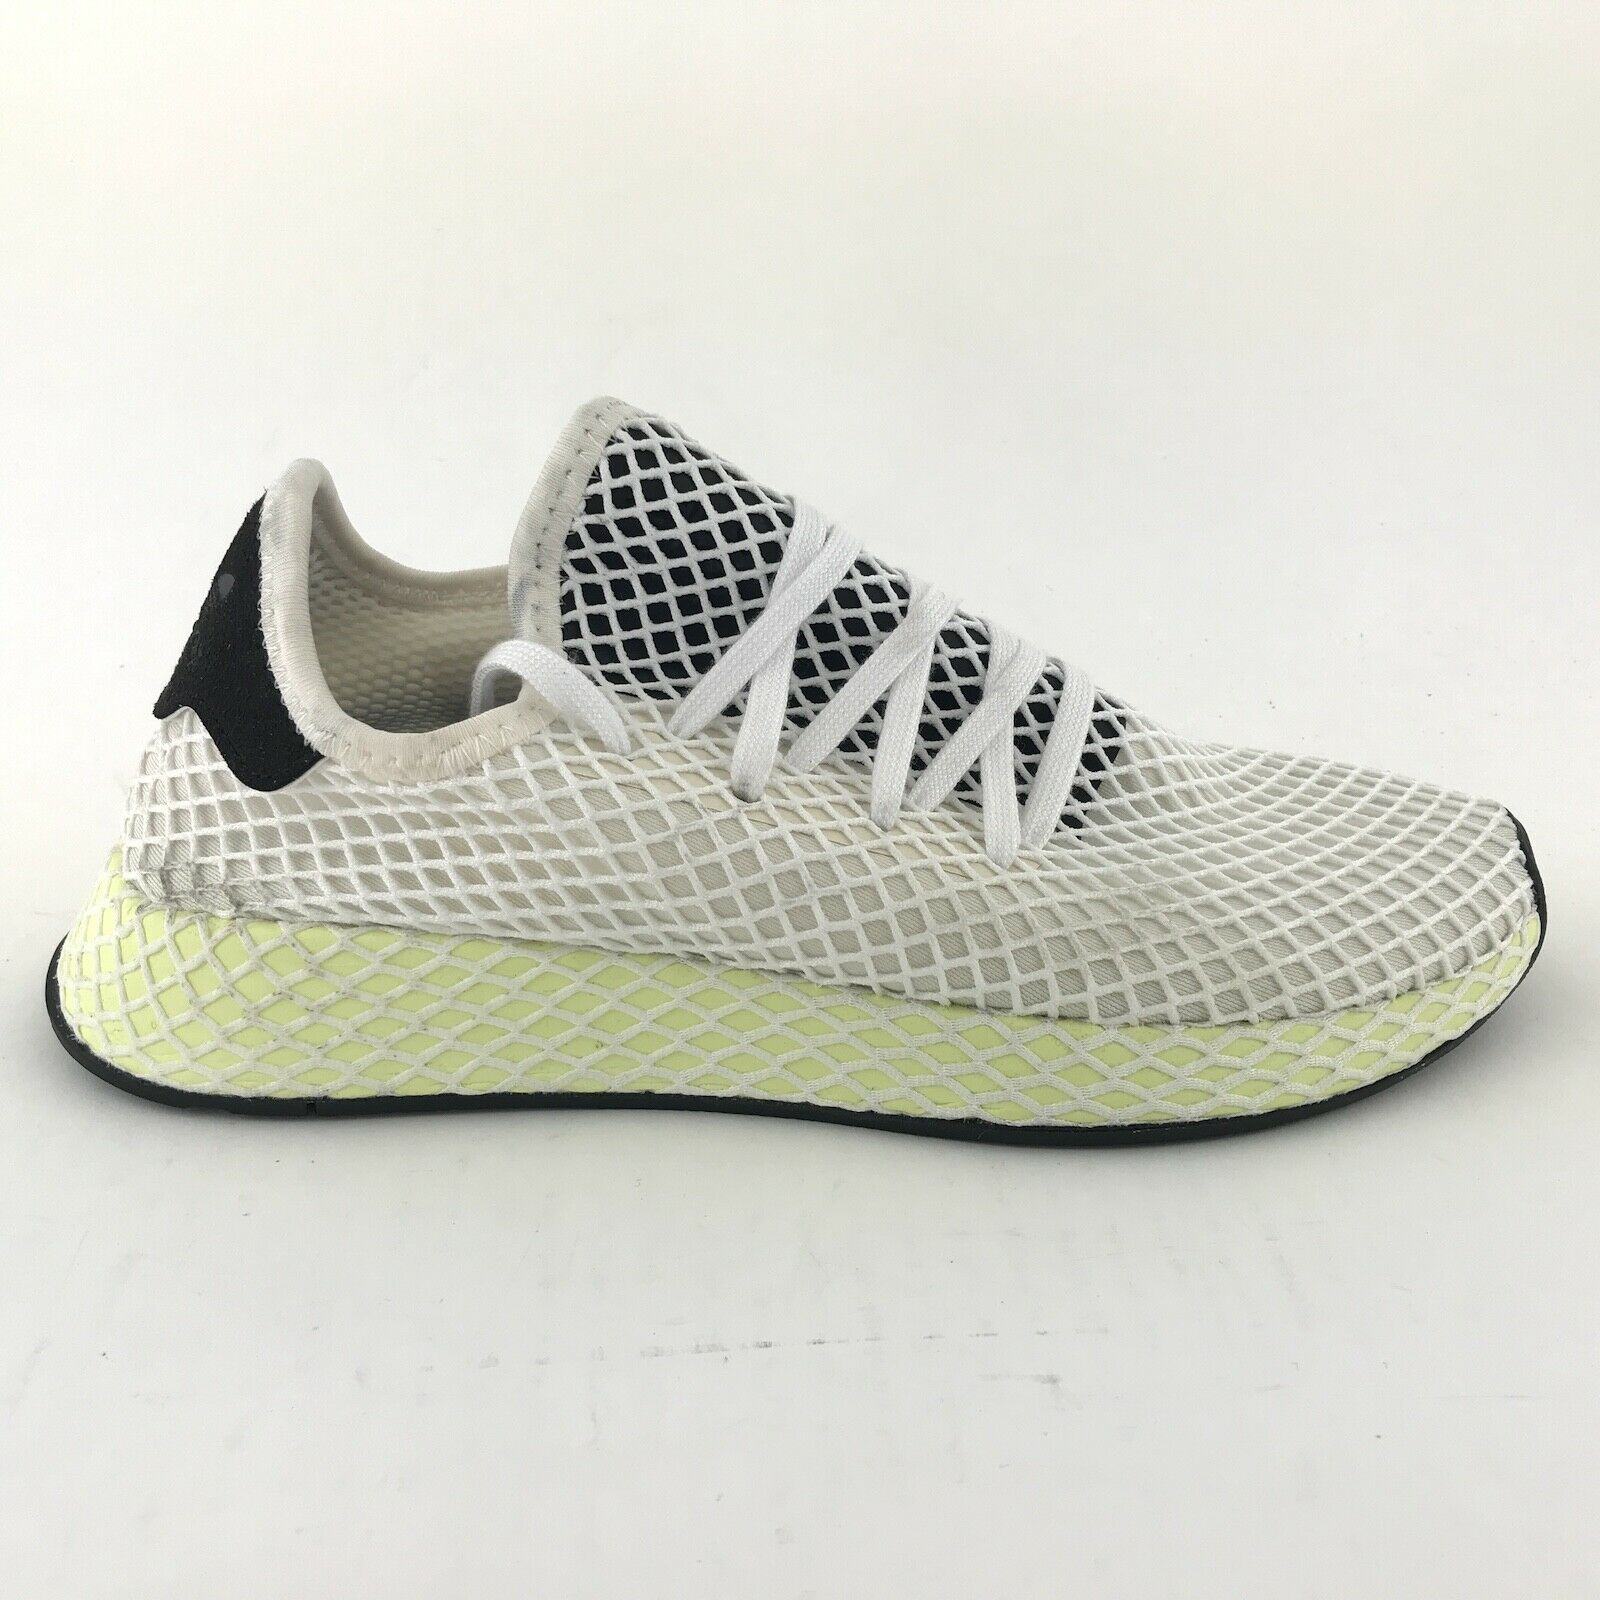 Adidas Deerupt Runner CQ2629 Mens Size 8.5 White Sneakers Shoes